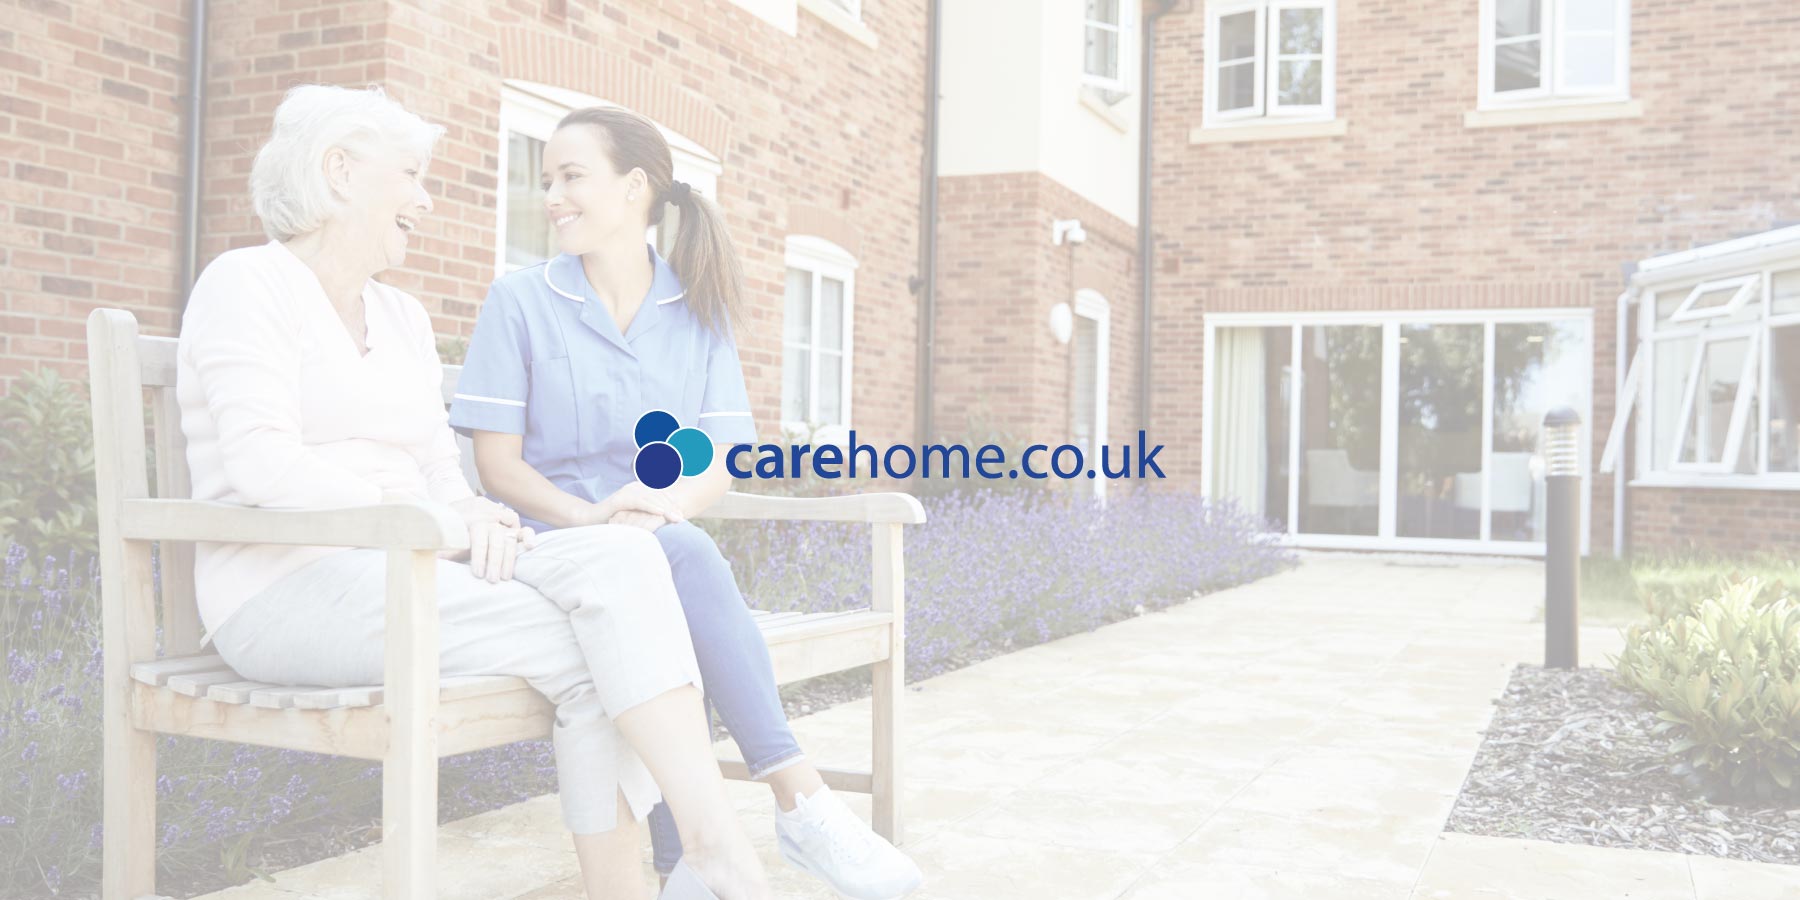 Featured image for “You can find us on carehome.co.uk!”